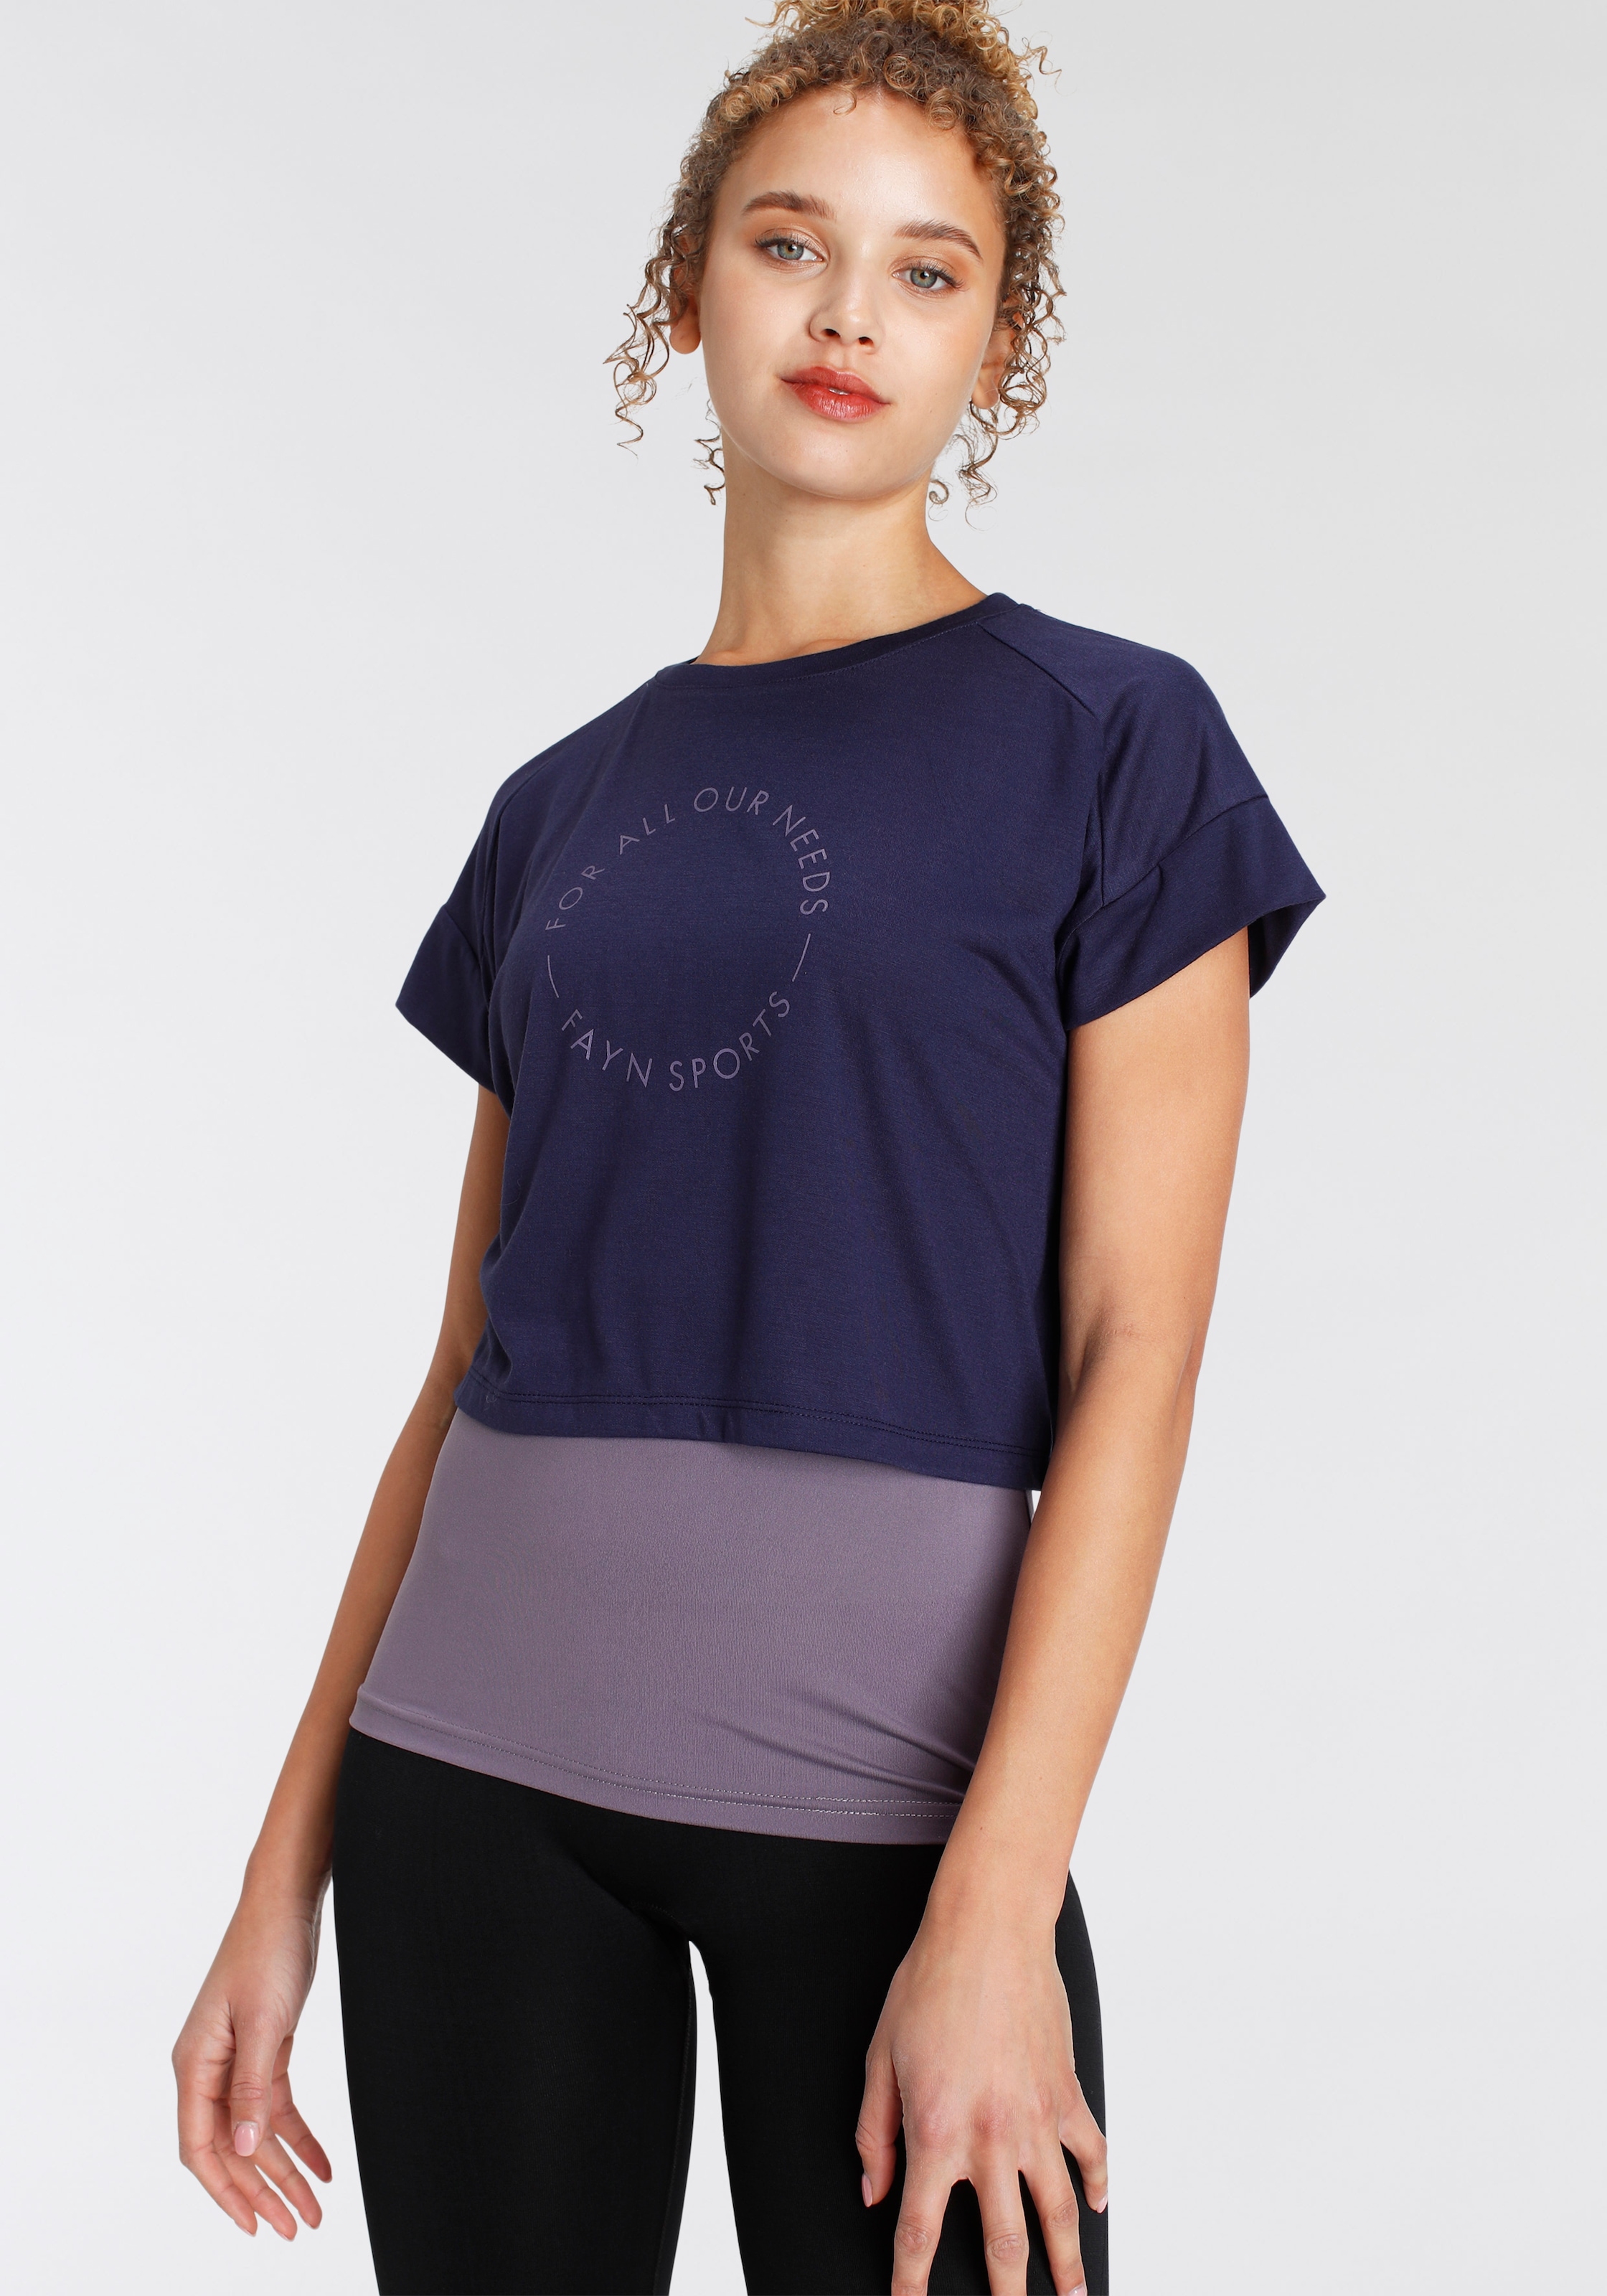 FAYN SPORTS T-Shirt »Cropped Top«, (Set, bei 2 tlg.) ♕